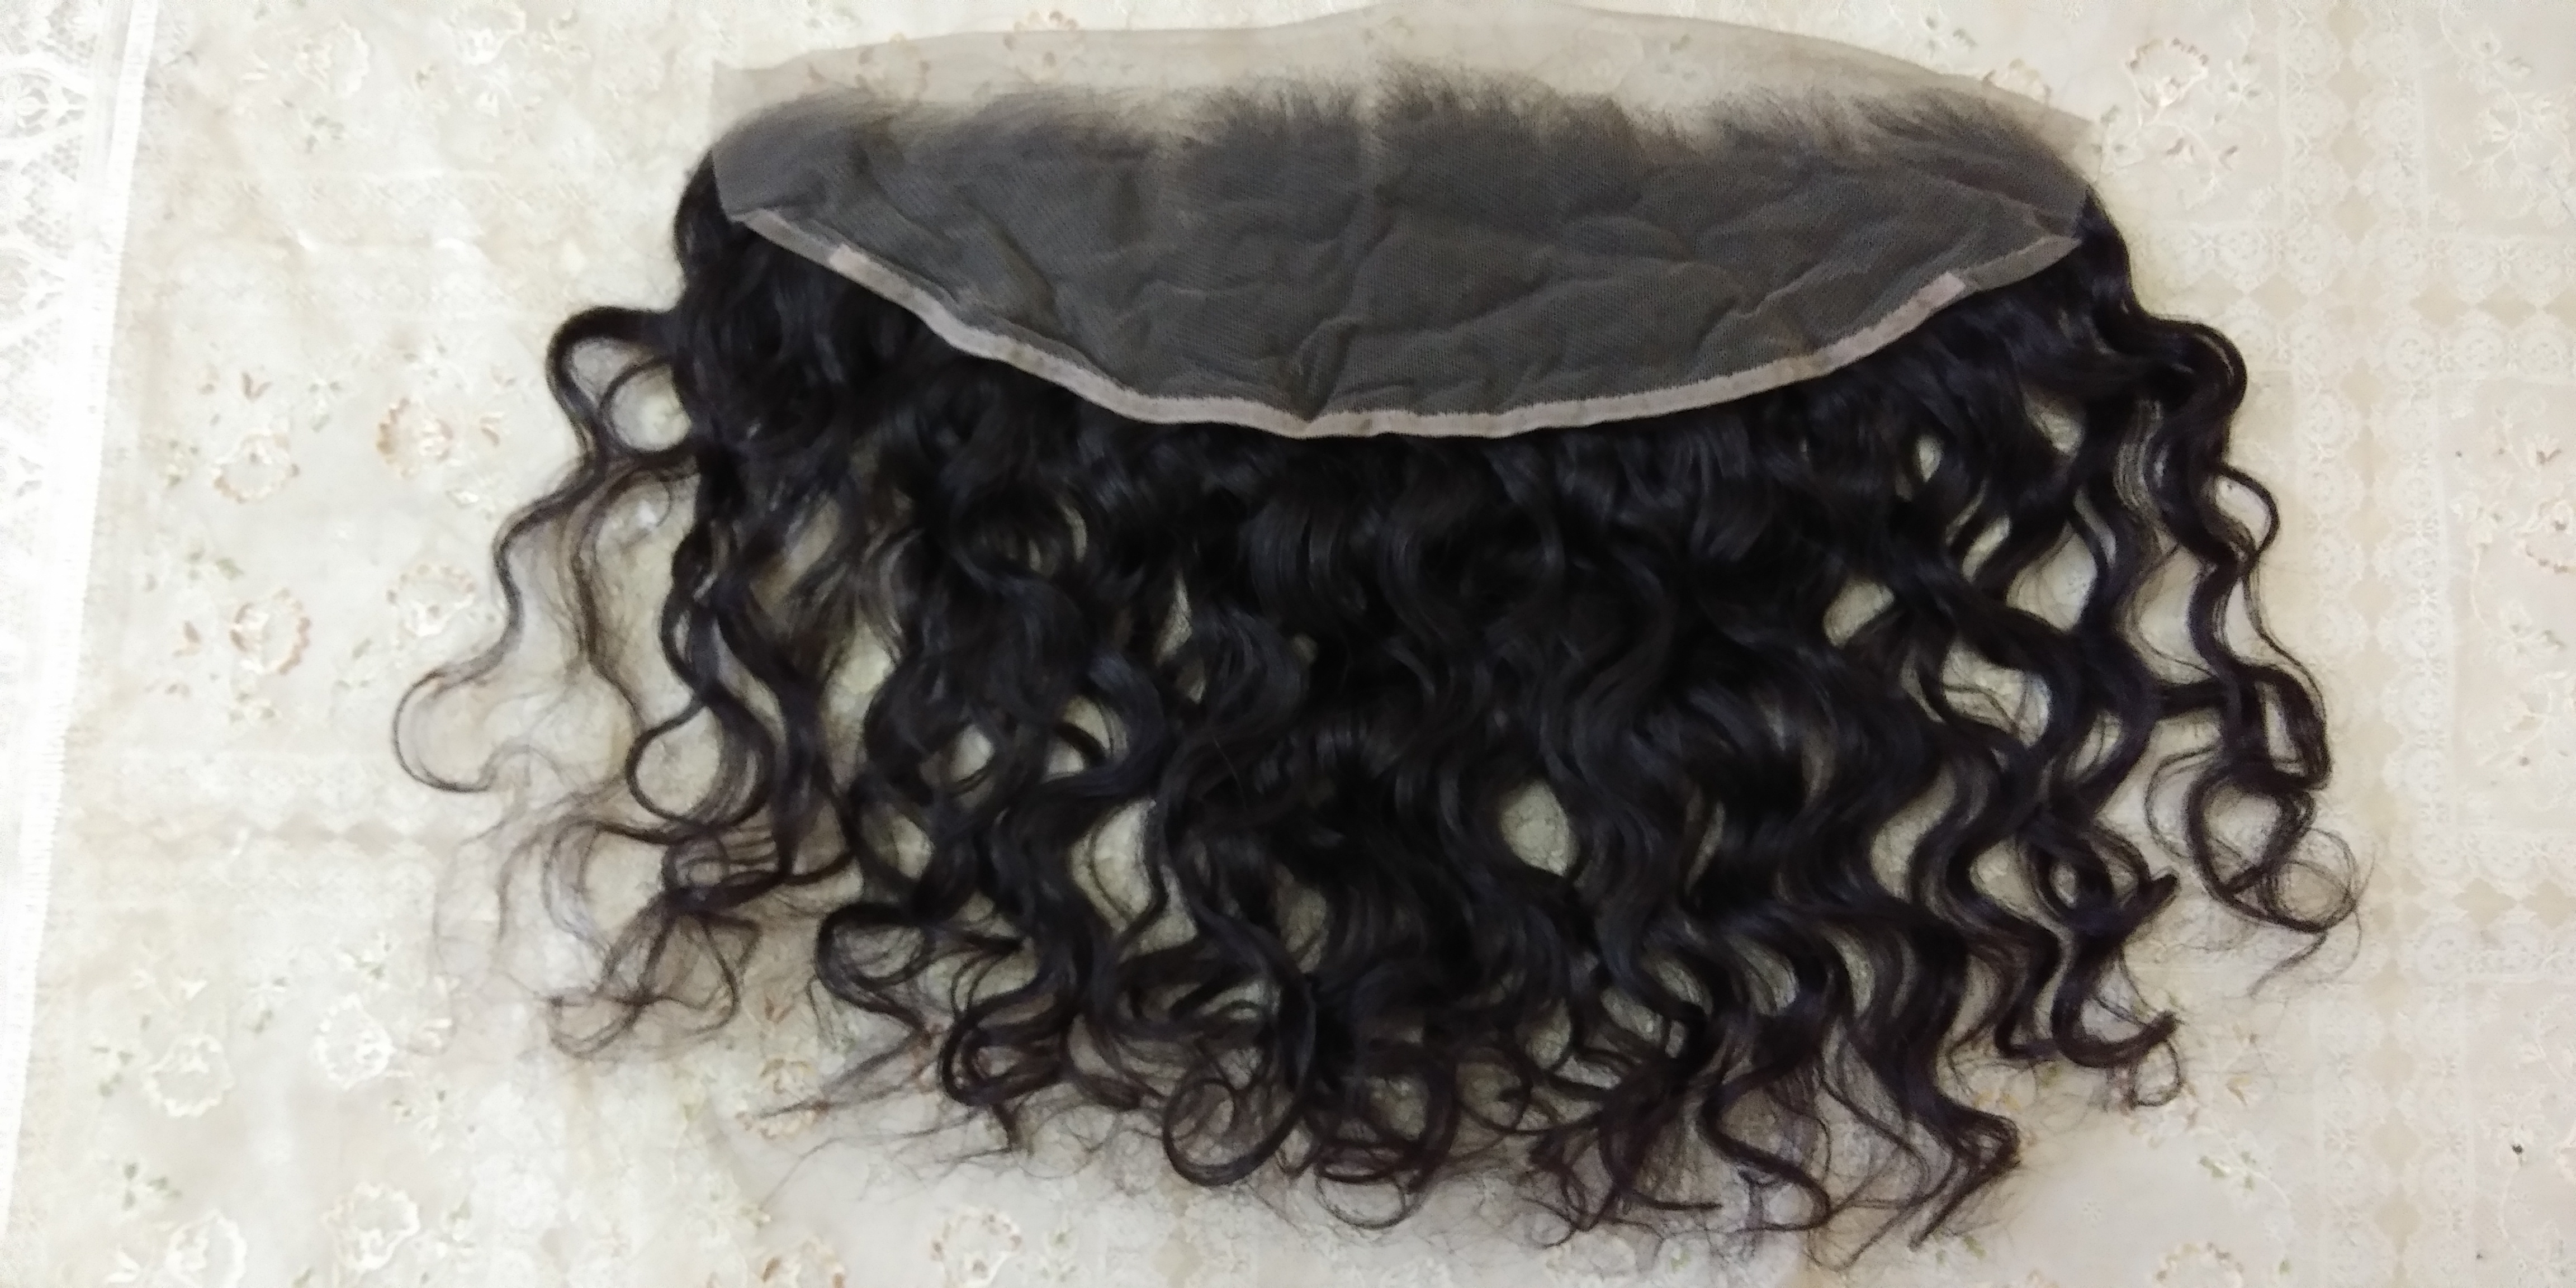 Unprocessed Curly Lace Frontal 13 4